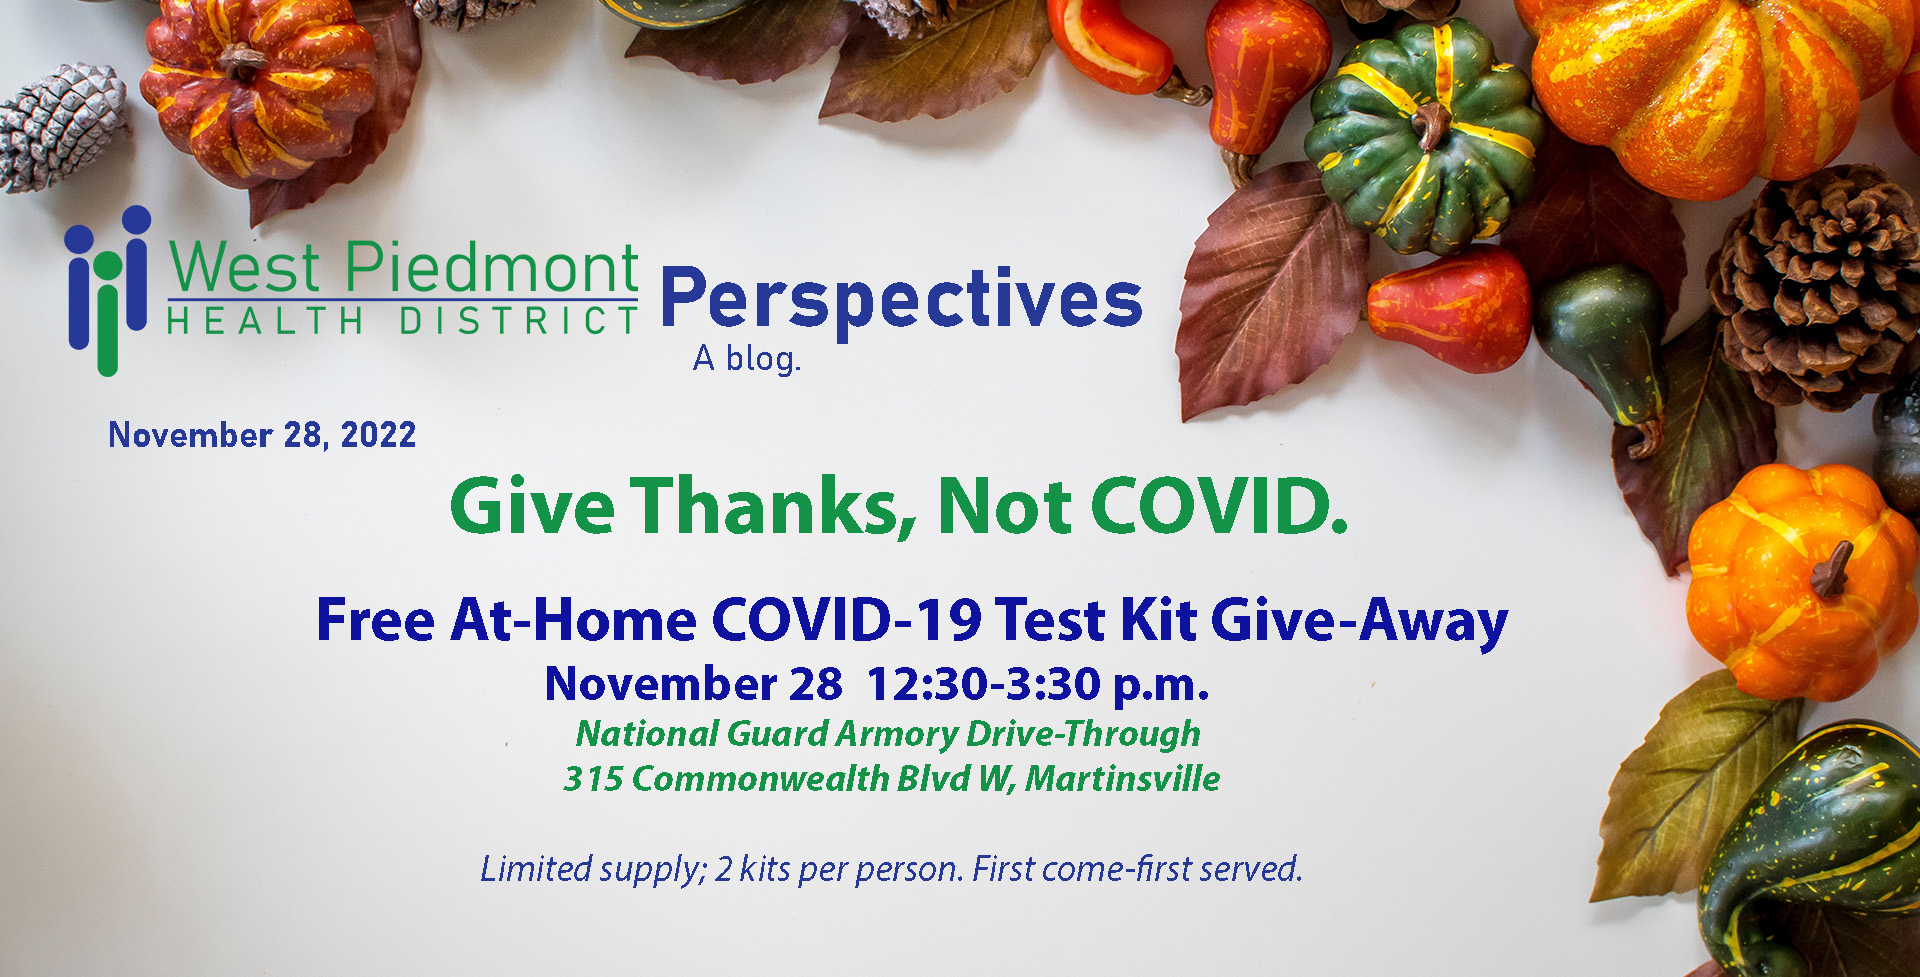 Give thanks, Not COVID. Free at home tests, Nov. 28, 12:30-3:30 National Guard Armory